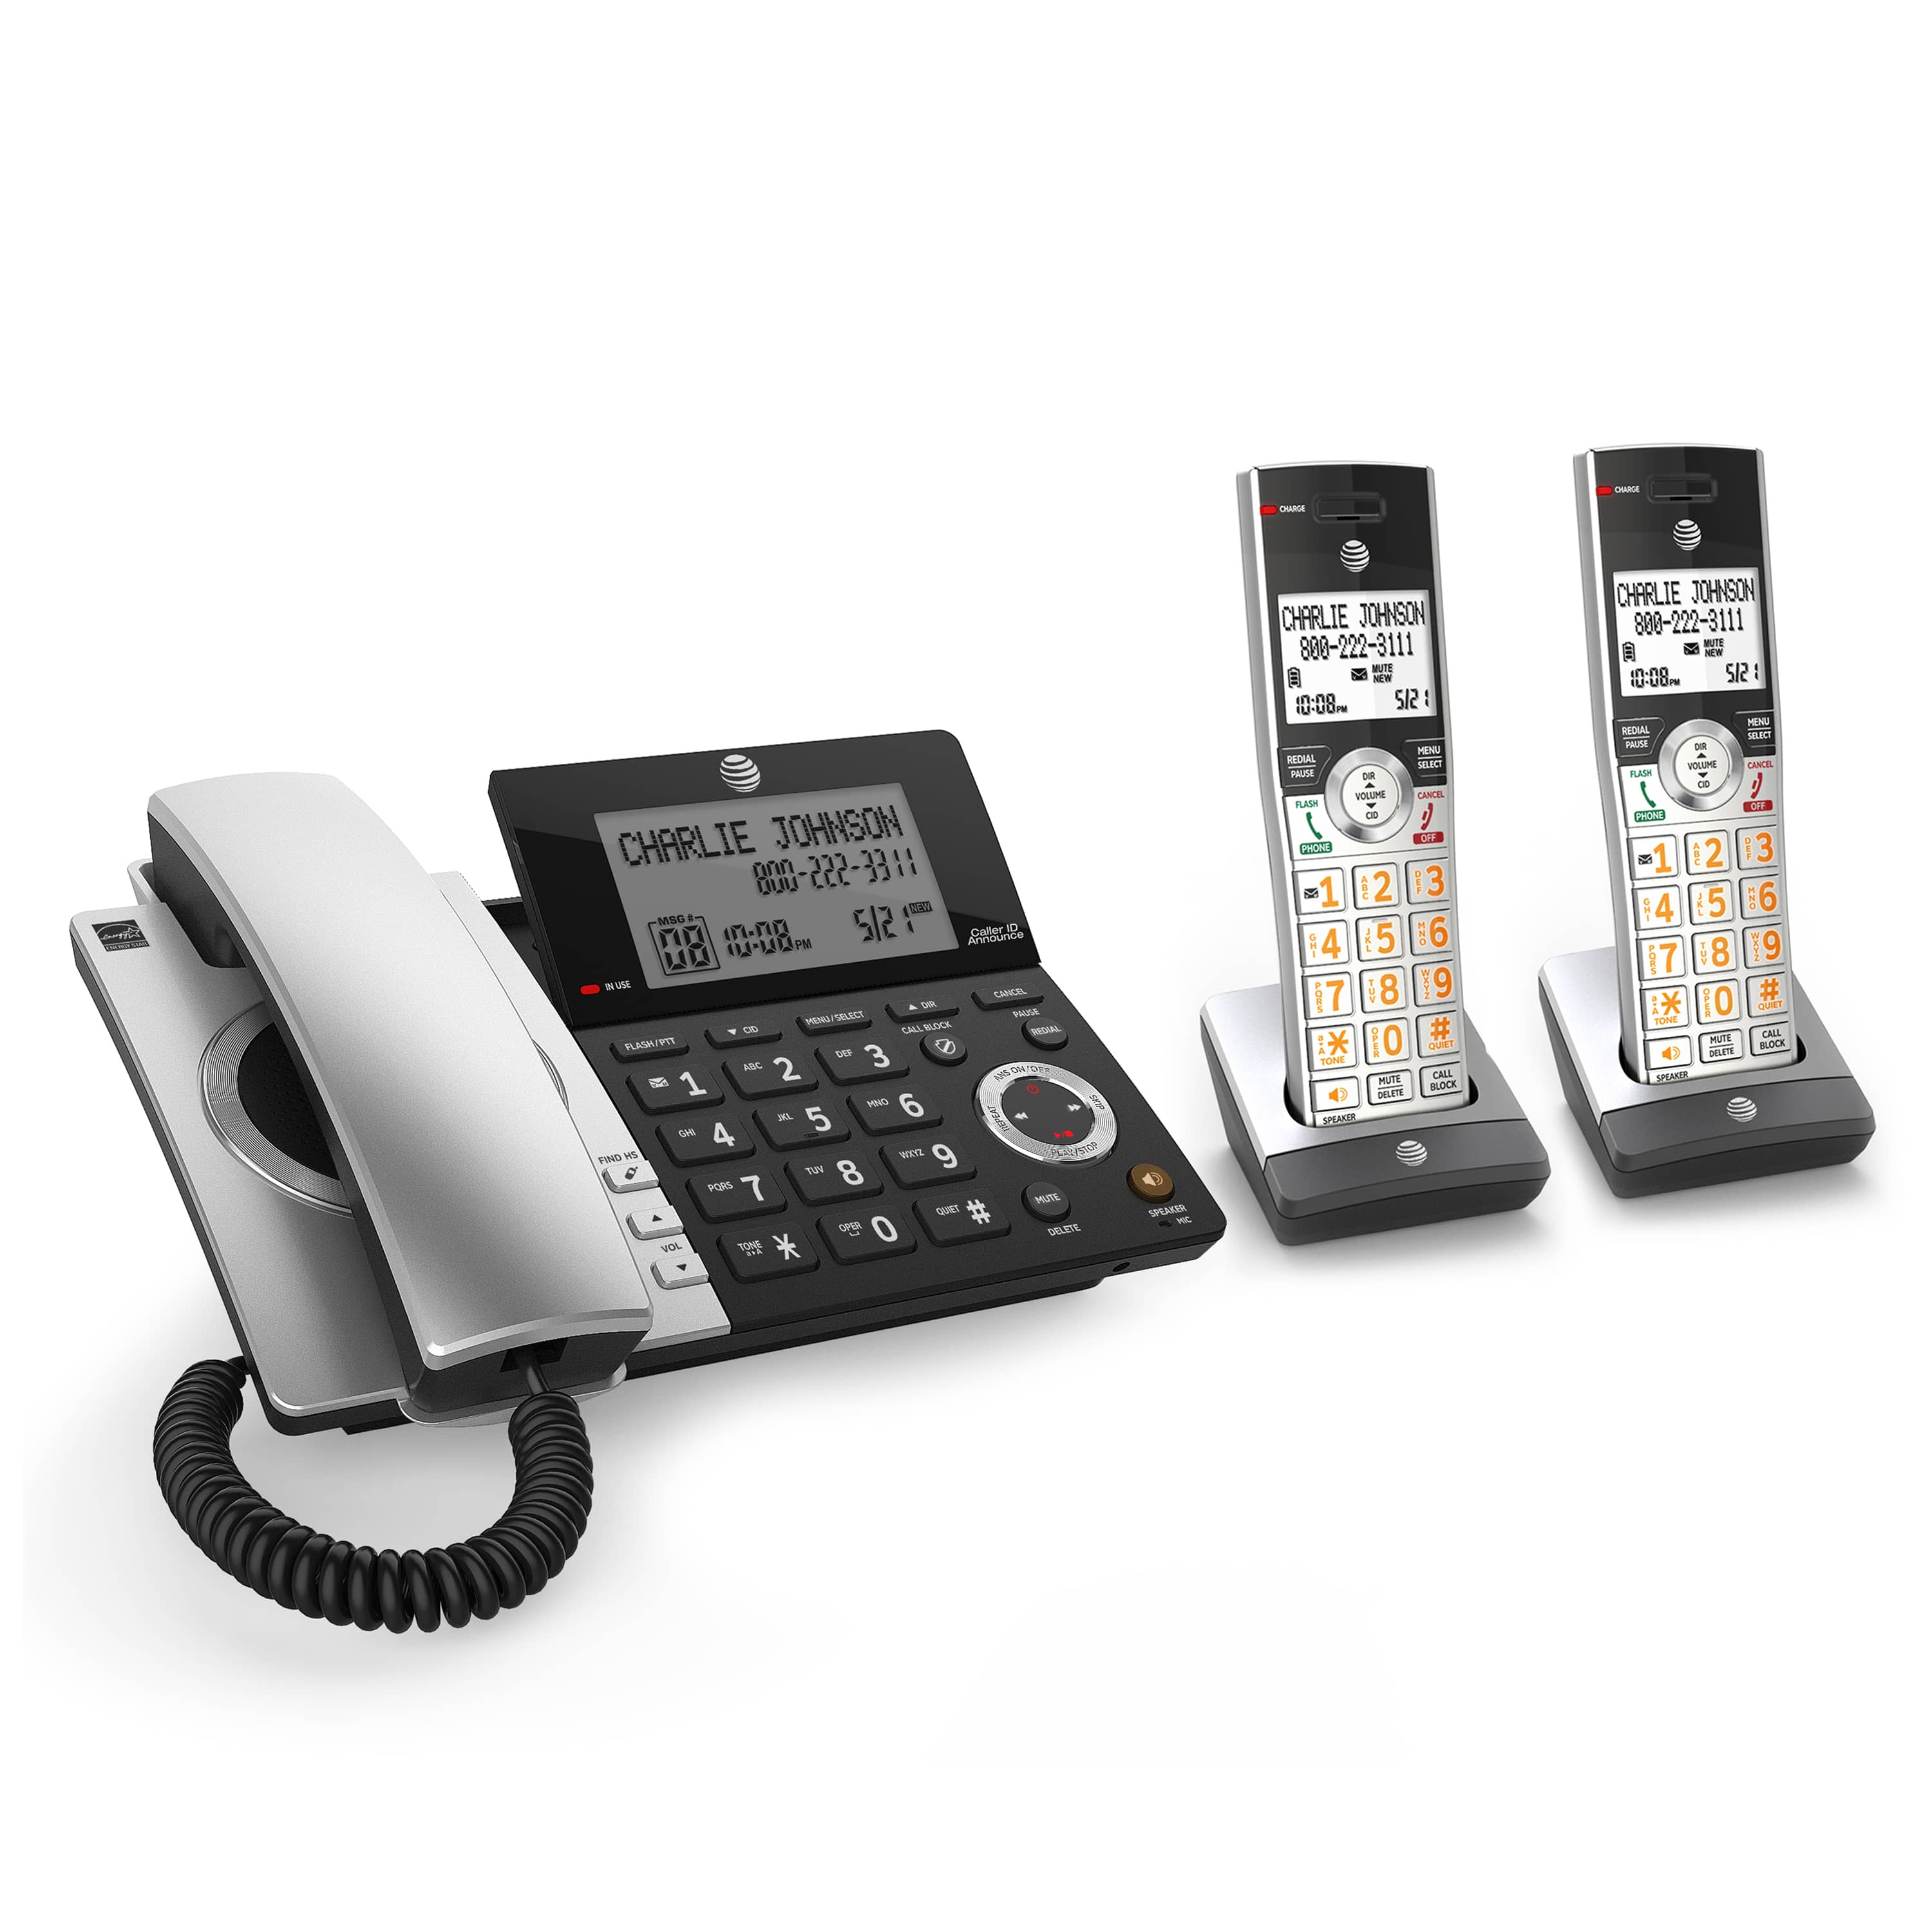 2 handset corded/cordless phone system with smart call blocker - view 3